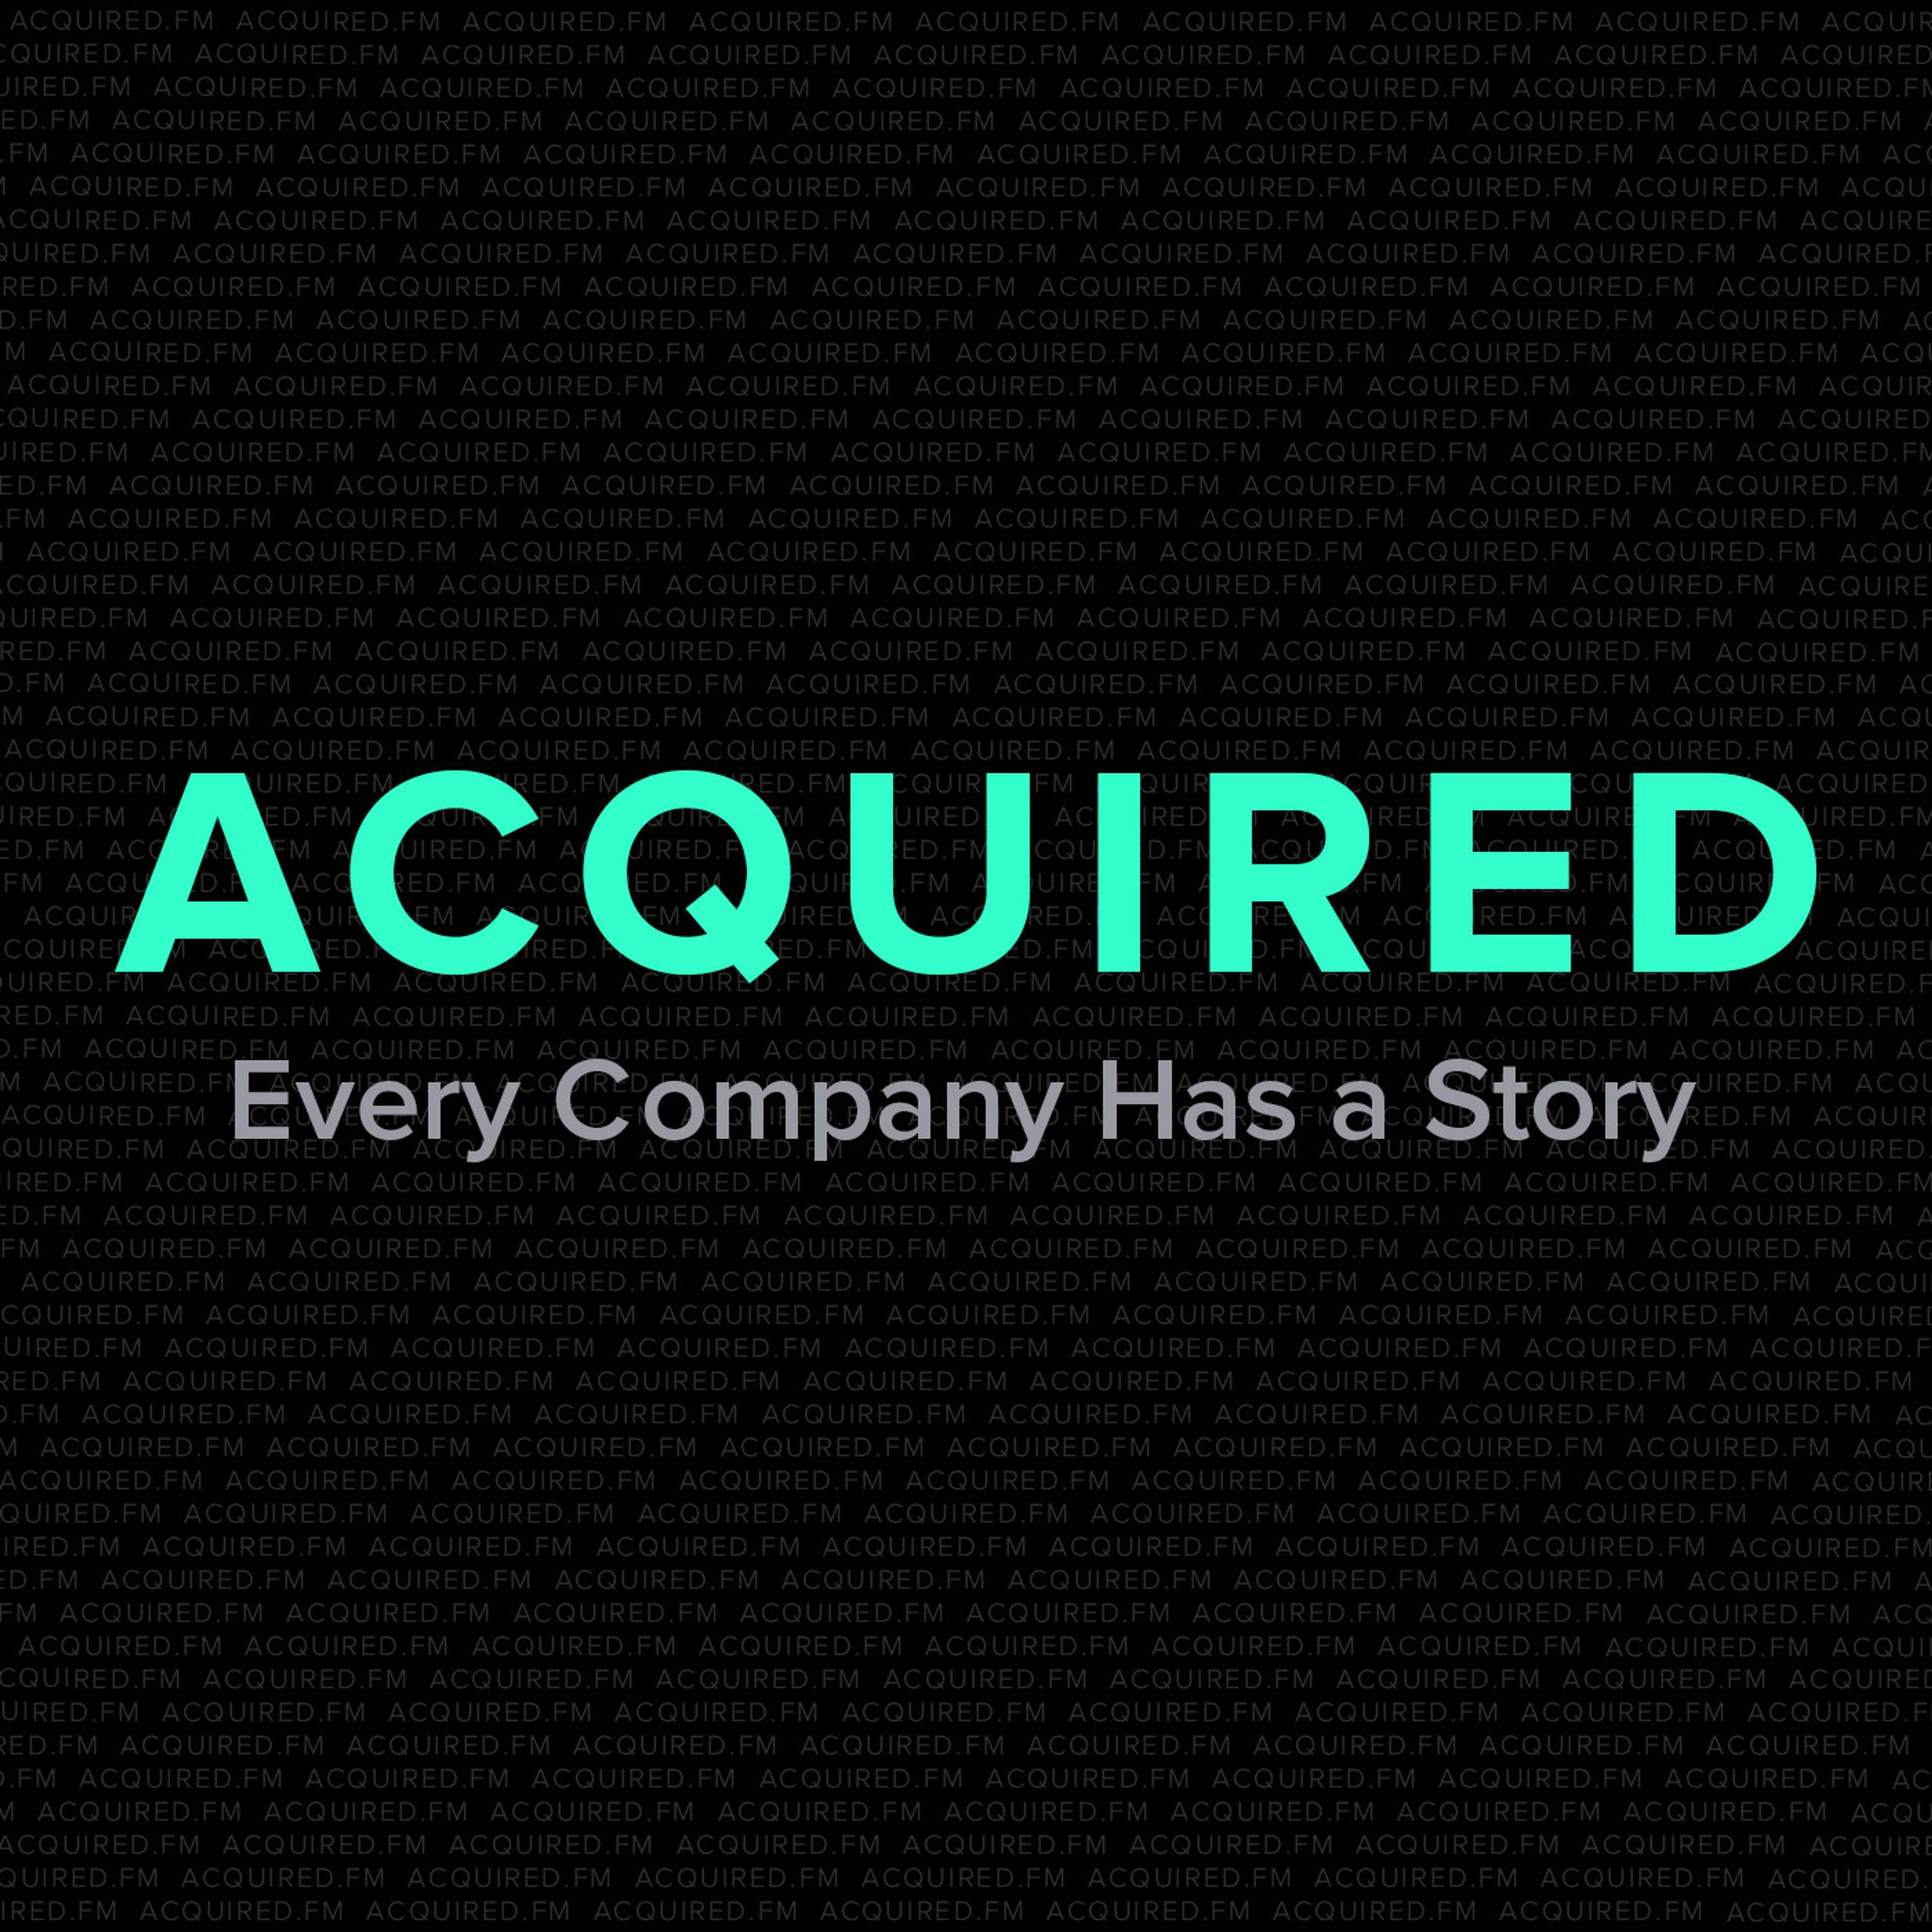 Acquired Episode 39: Whole Foods Market